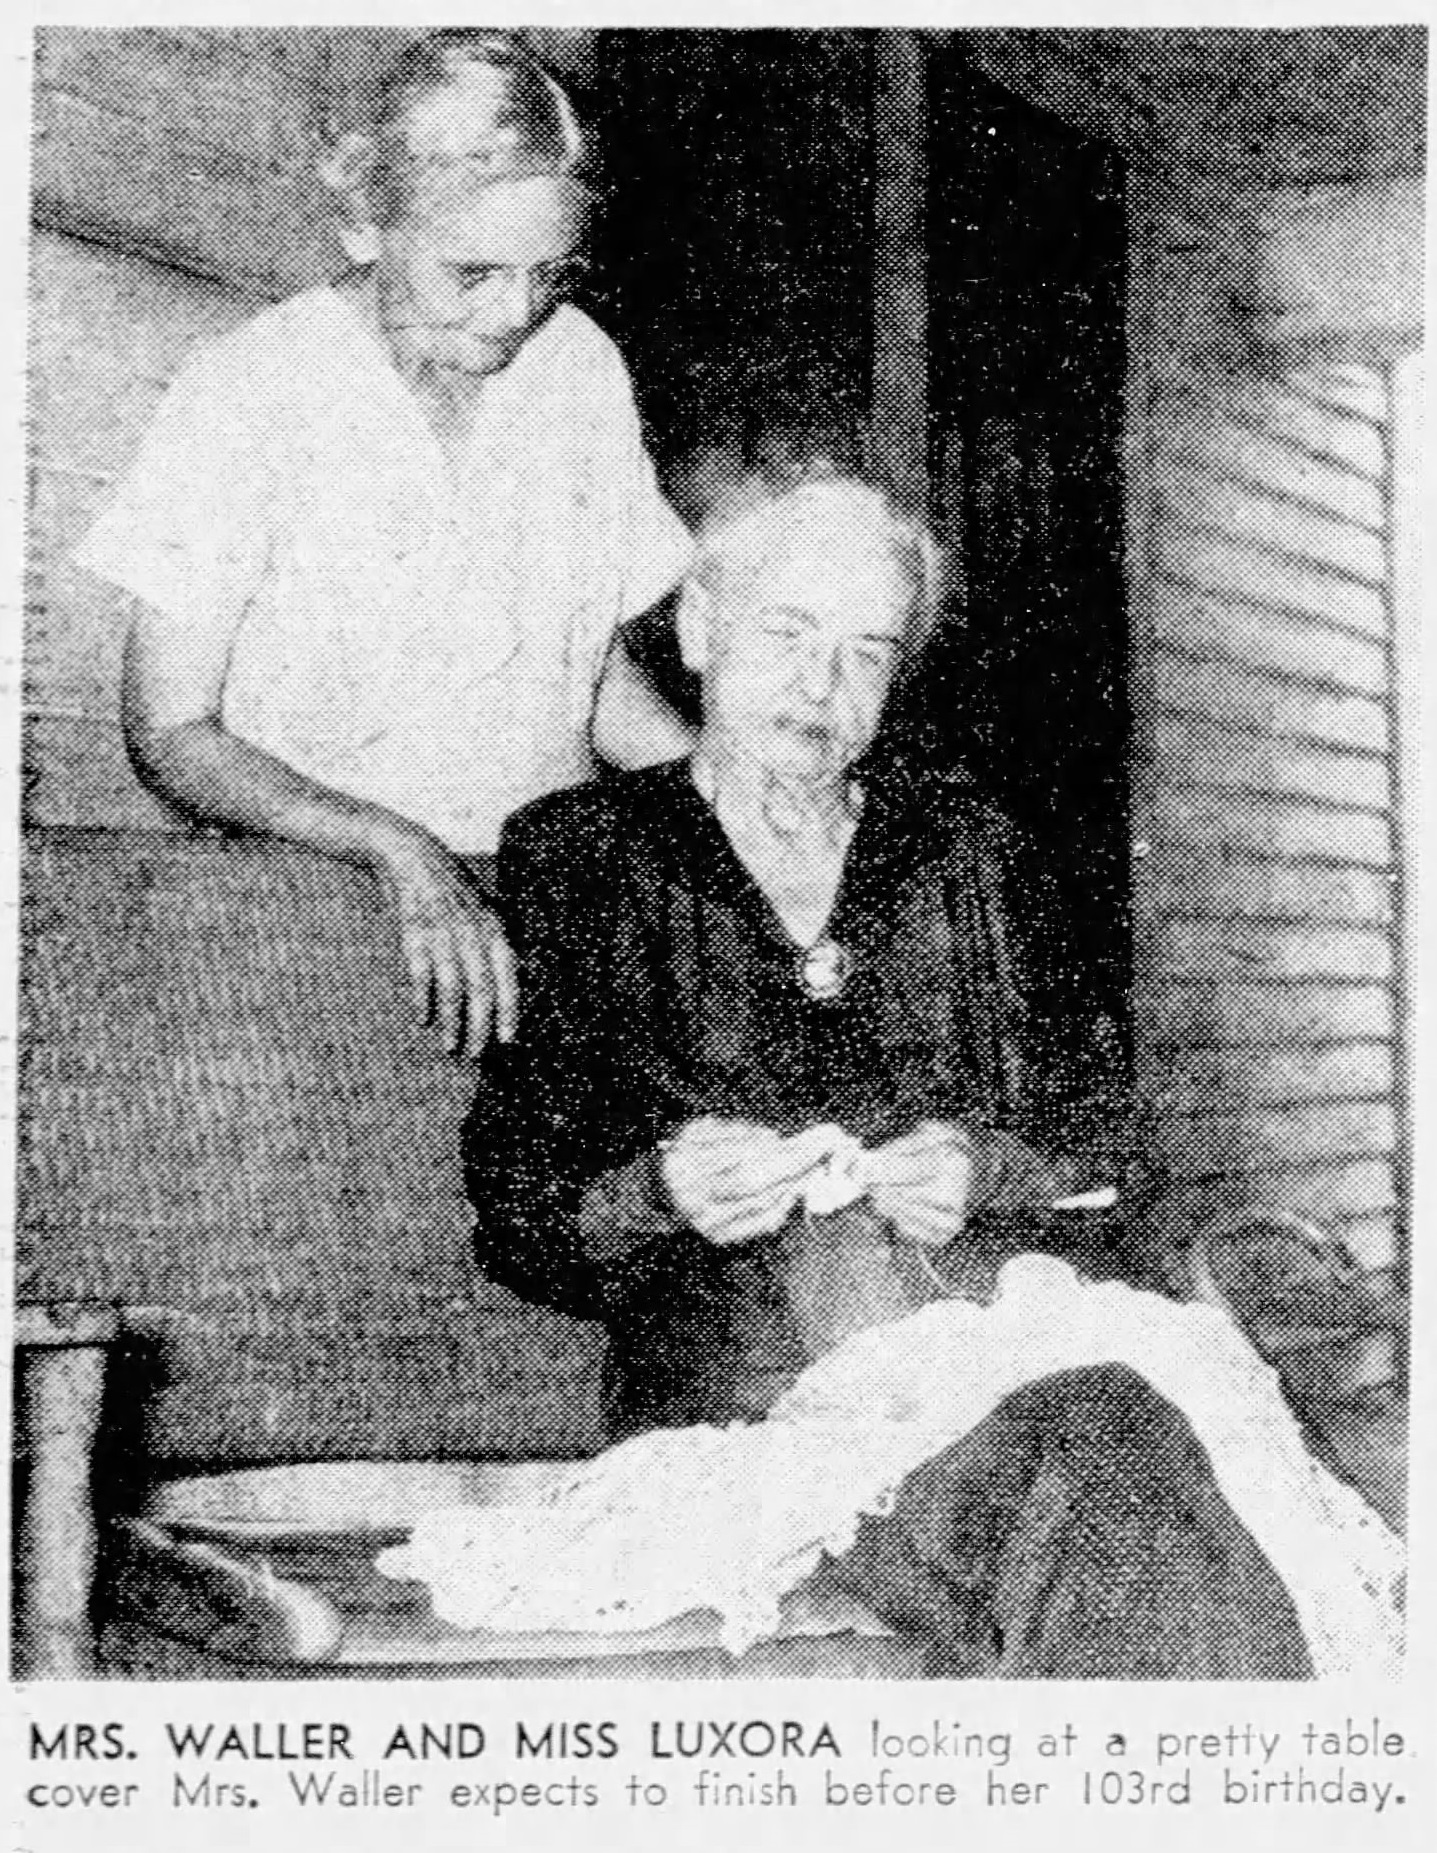 In January 1951, aged 103, along with her daughter, Luxora. (Source: The Memphis Press-Scimitar)